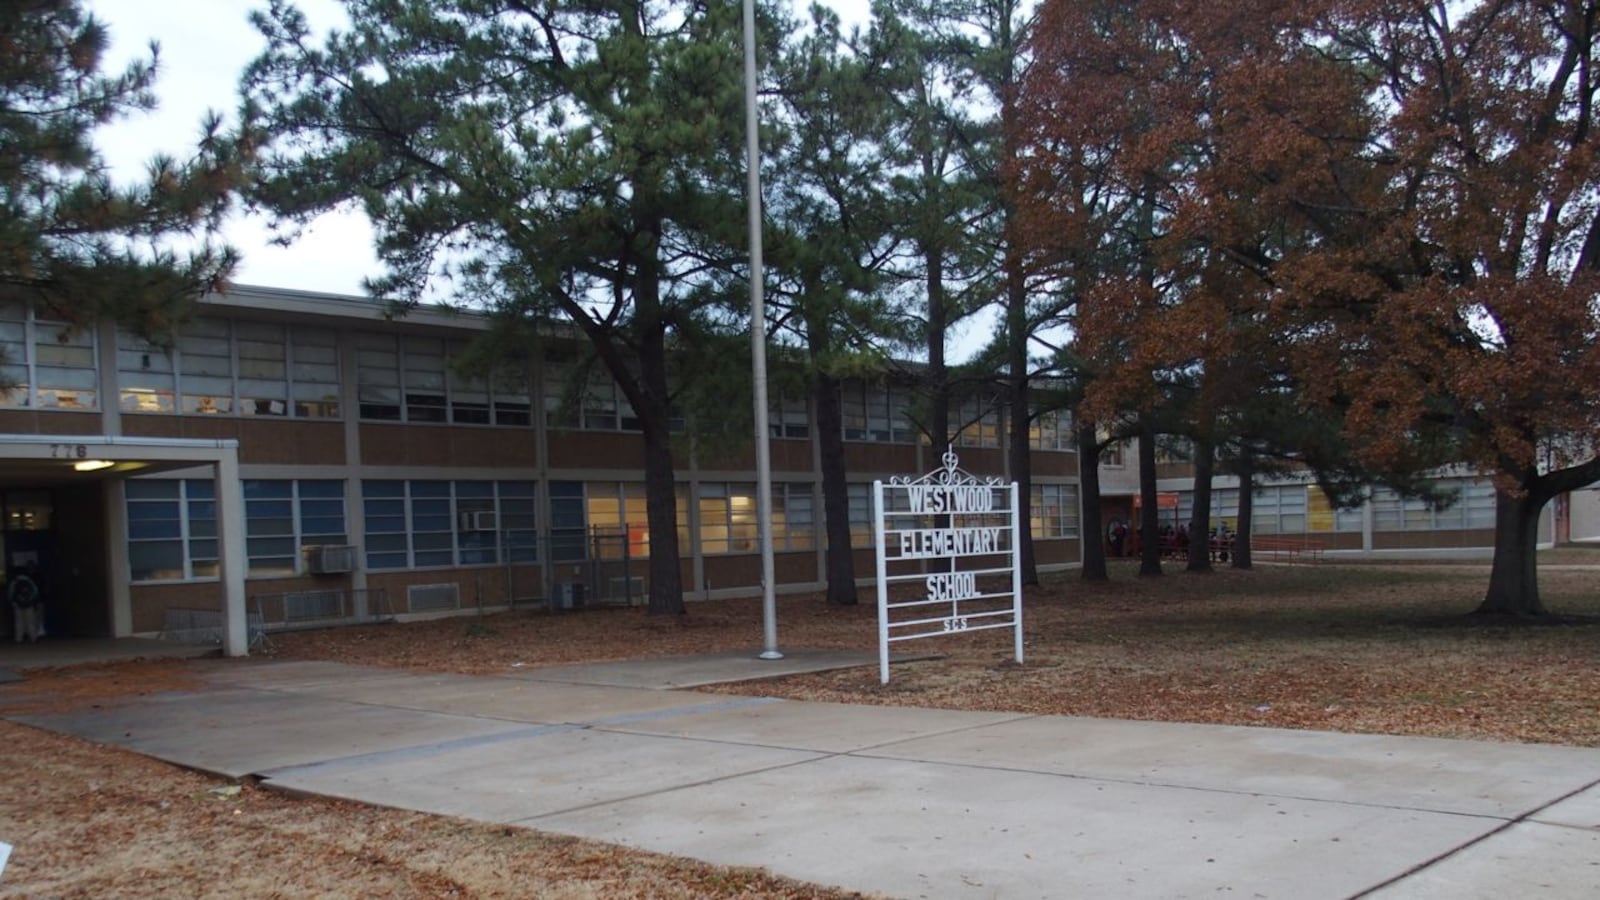 Westwood Elementary School was co-located with Freedom Prep Elementary this year.